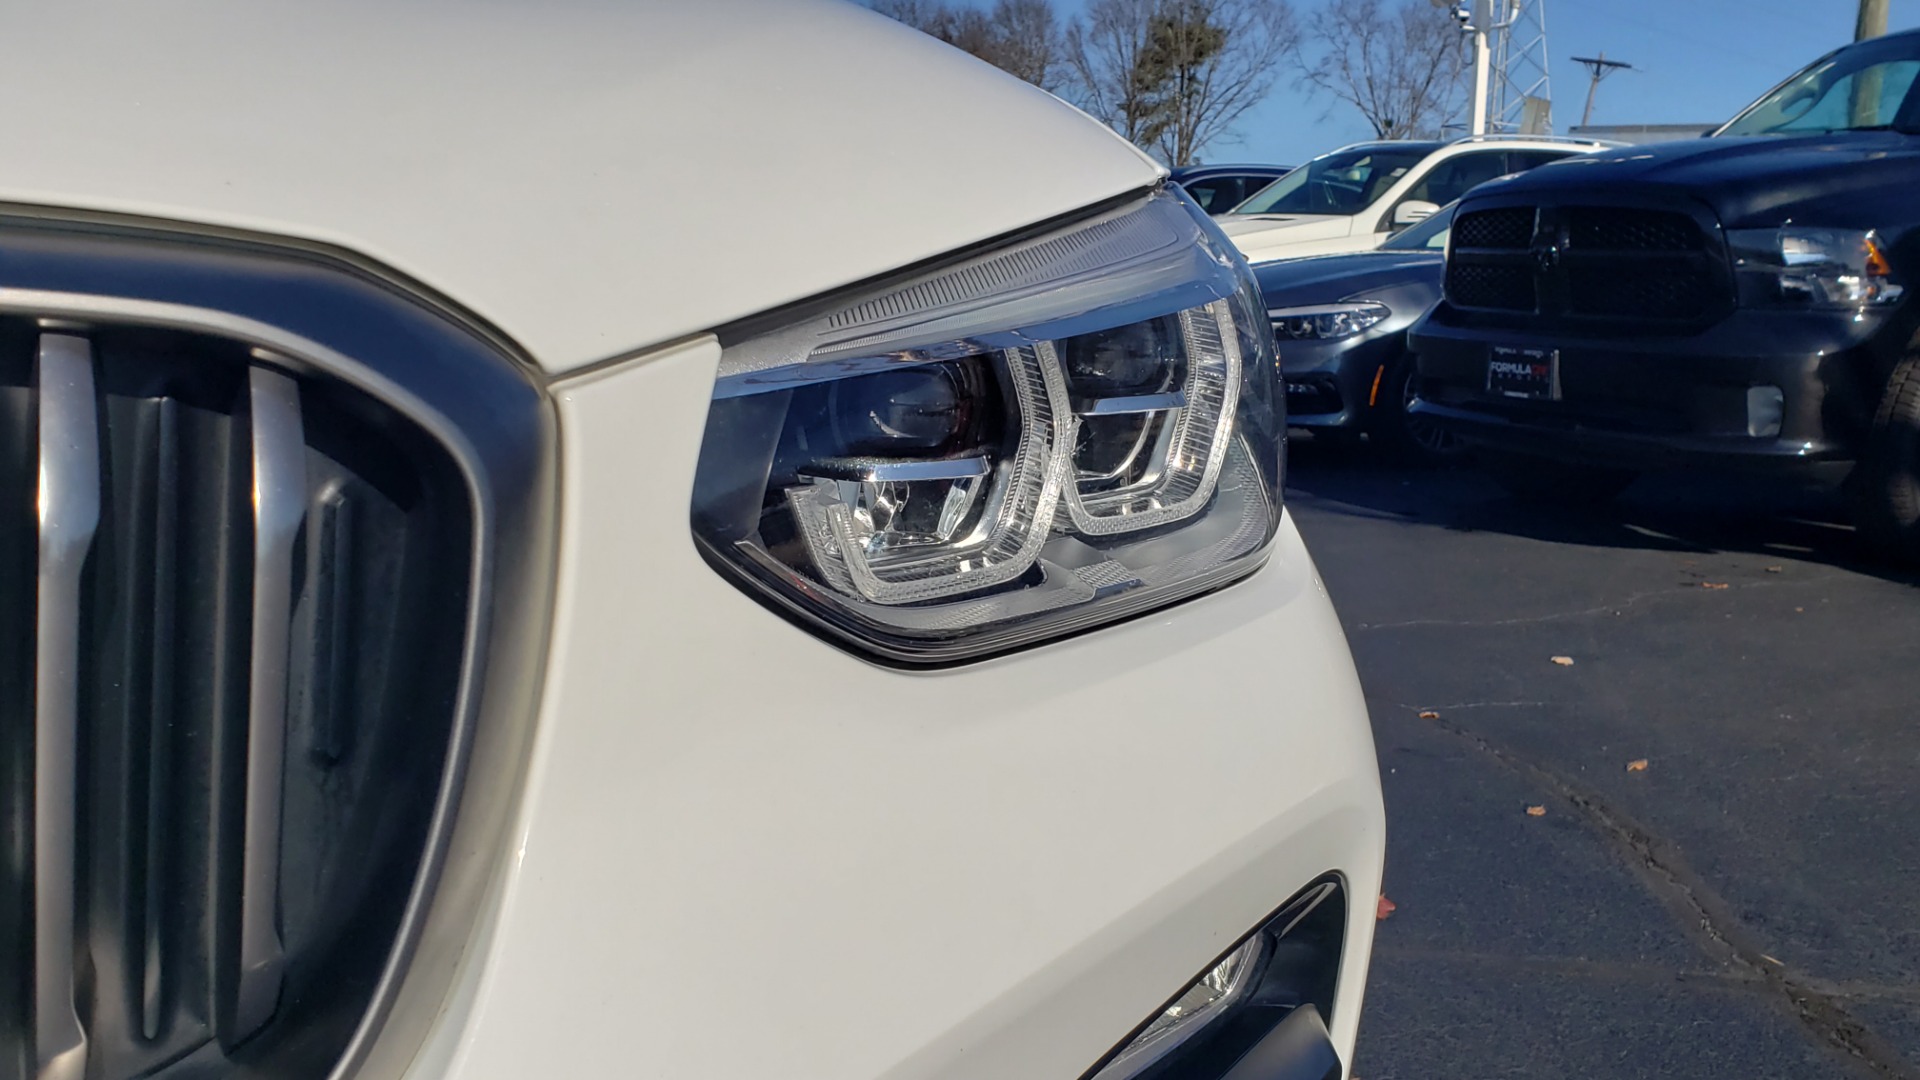 Used 2019 BMW X3 M40I SPORT / NAV / SUNROOF / DRVR ASST / PARK ASST / HTD STS / REARVIEW for sale $53,495 at Formula Imports in Charlotte NC 28227 24